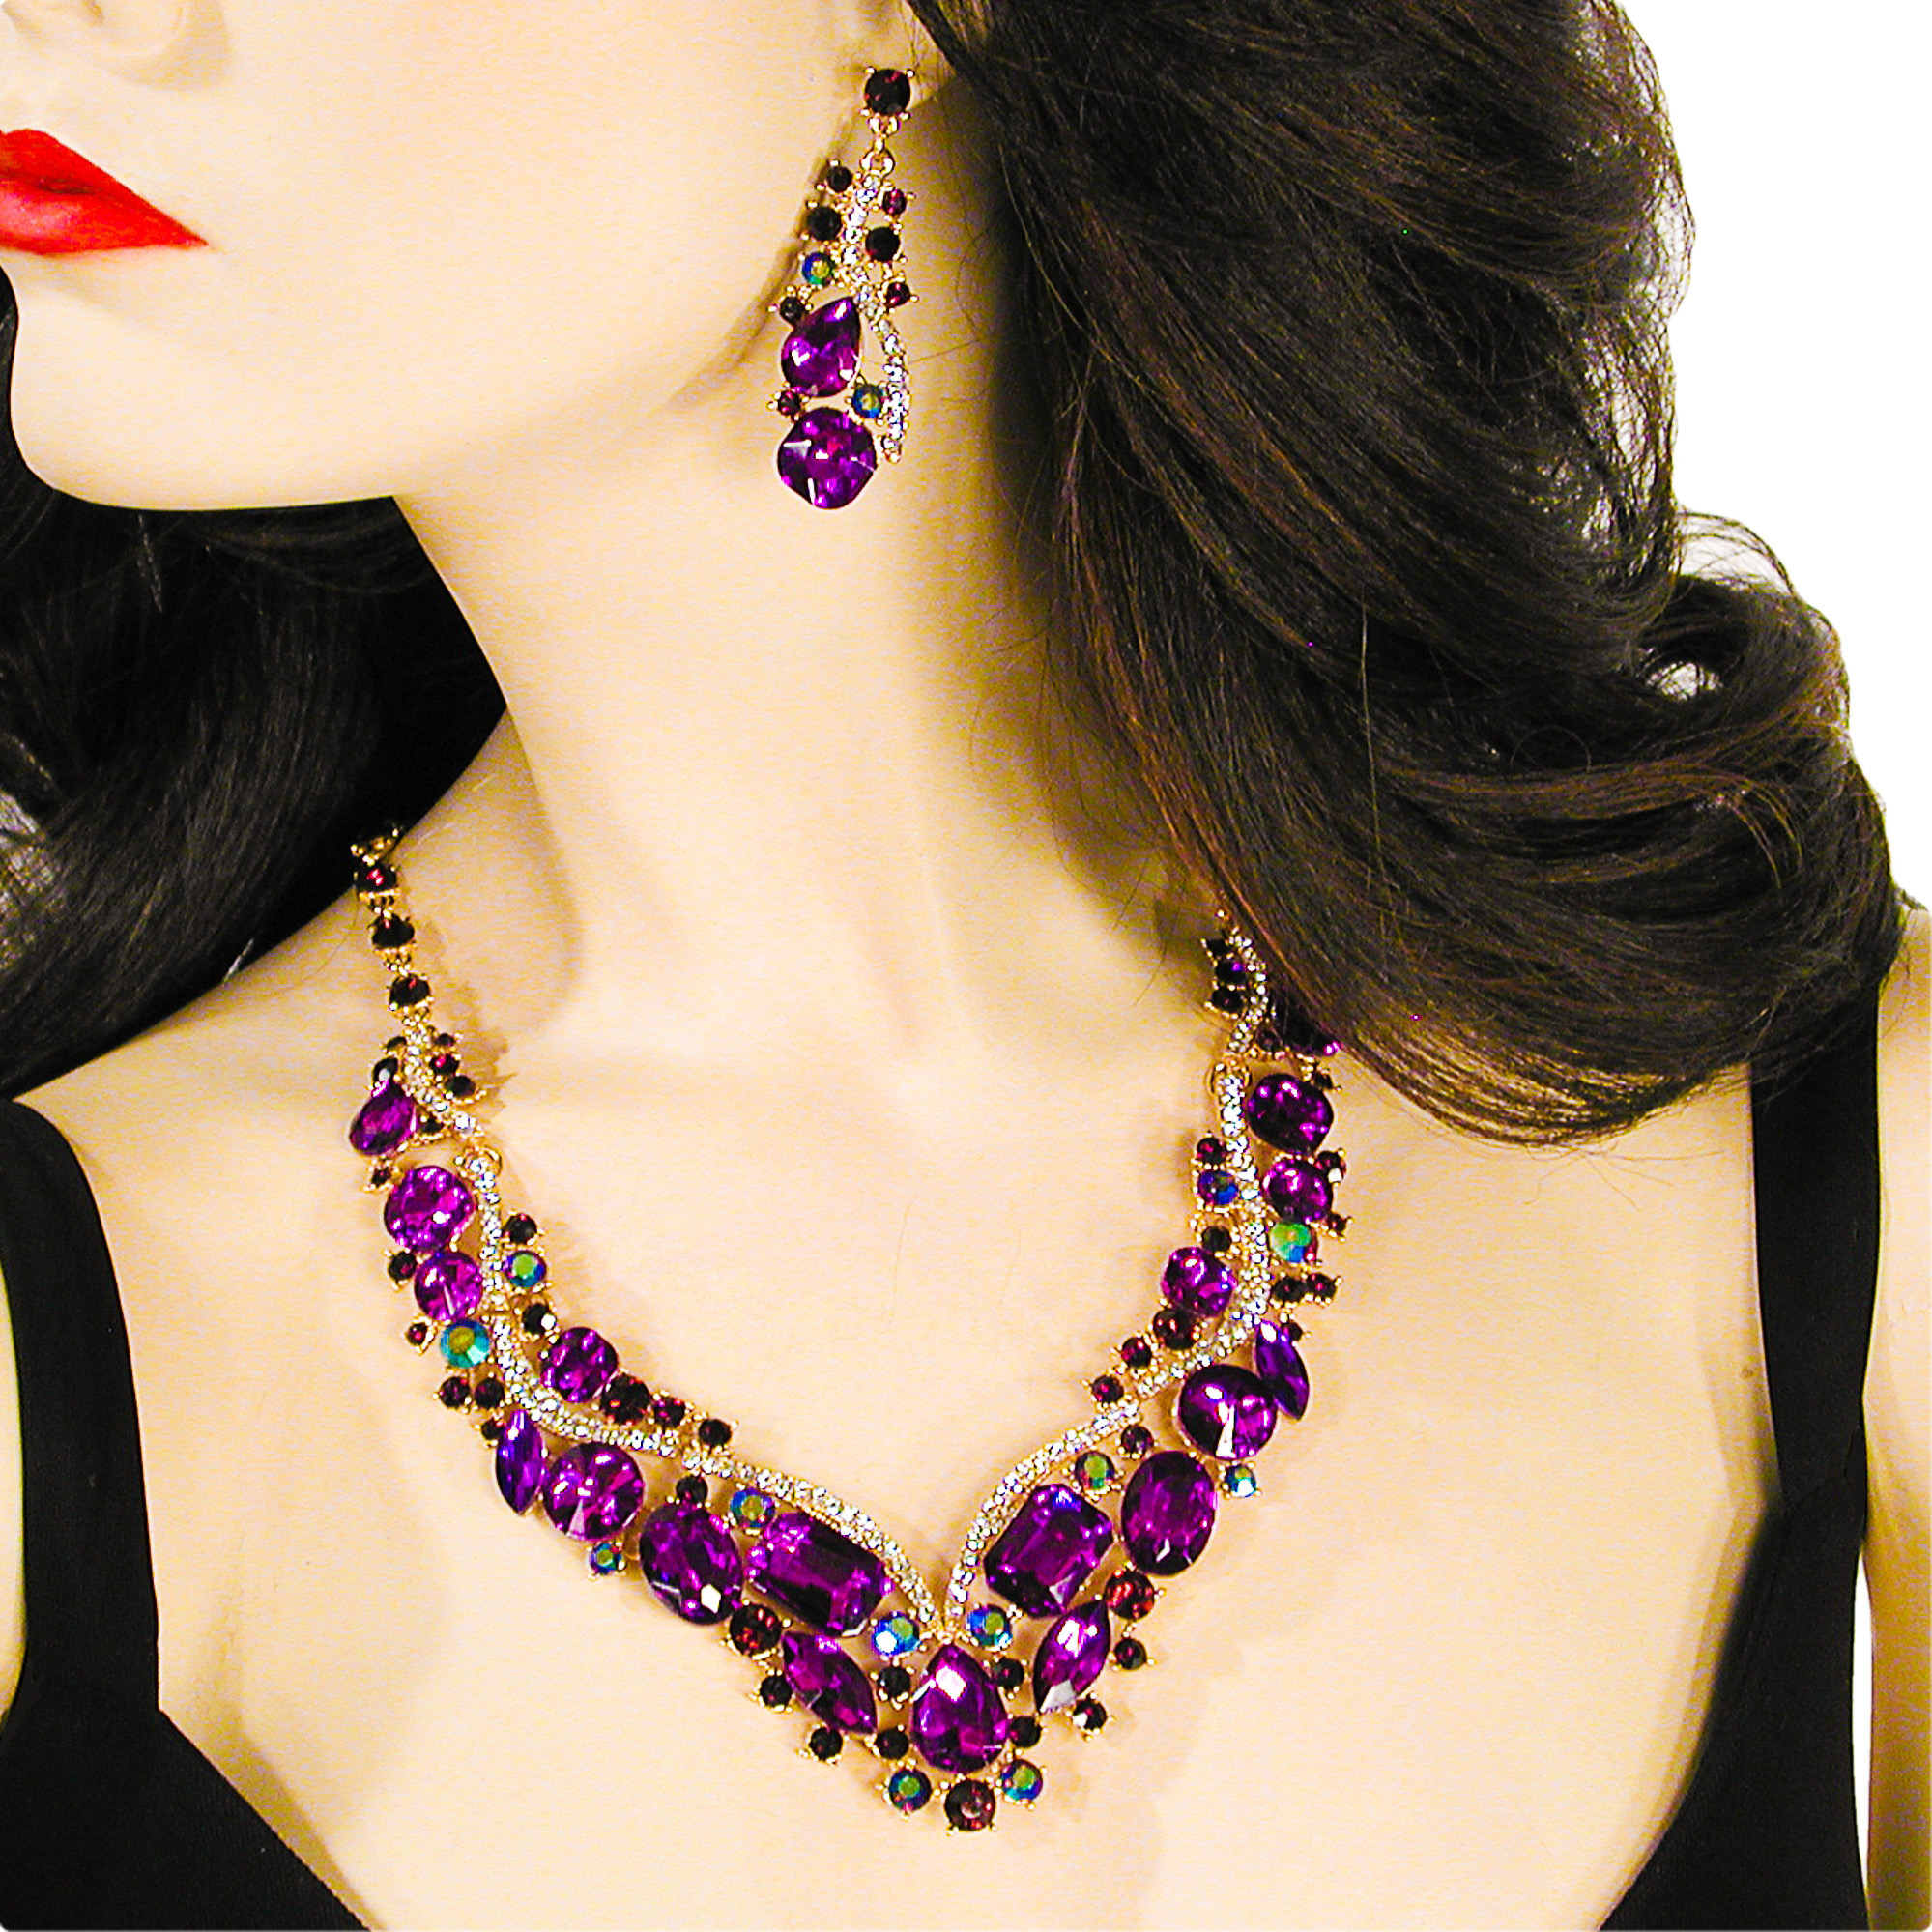 Large Crystal Rhinestone Statement Bib Necklace Solid/Multi Colors, a fashion accessorie - Evening Elegance